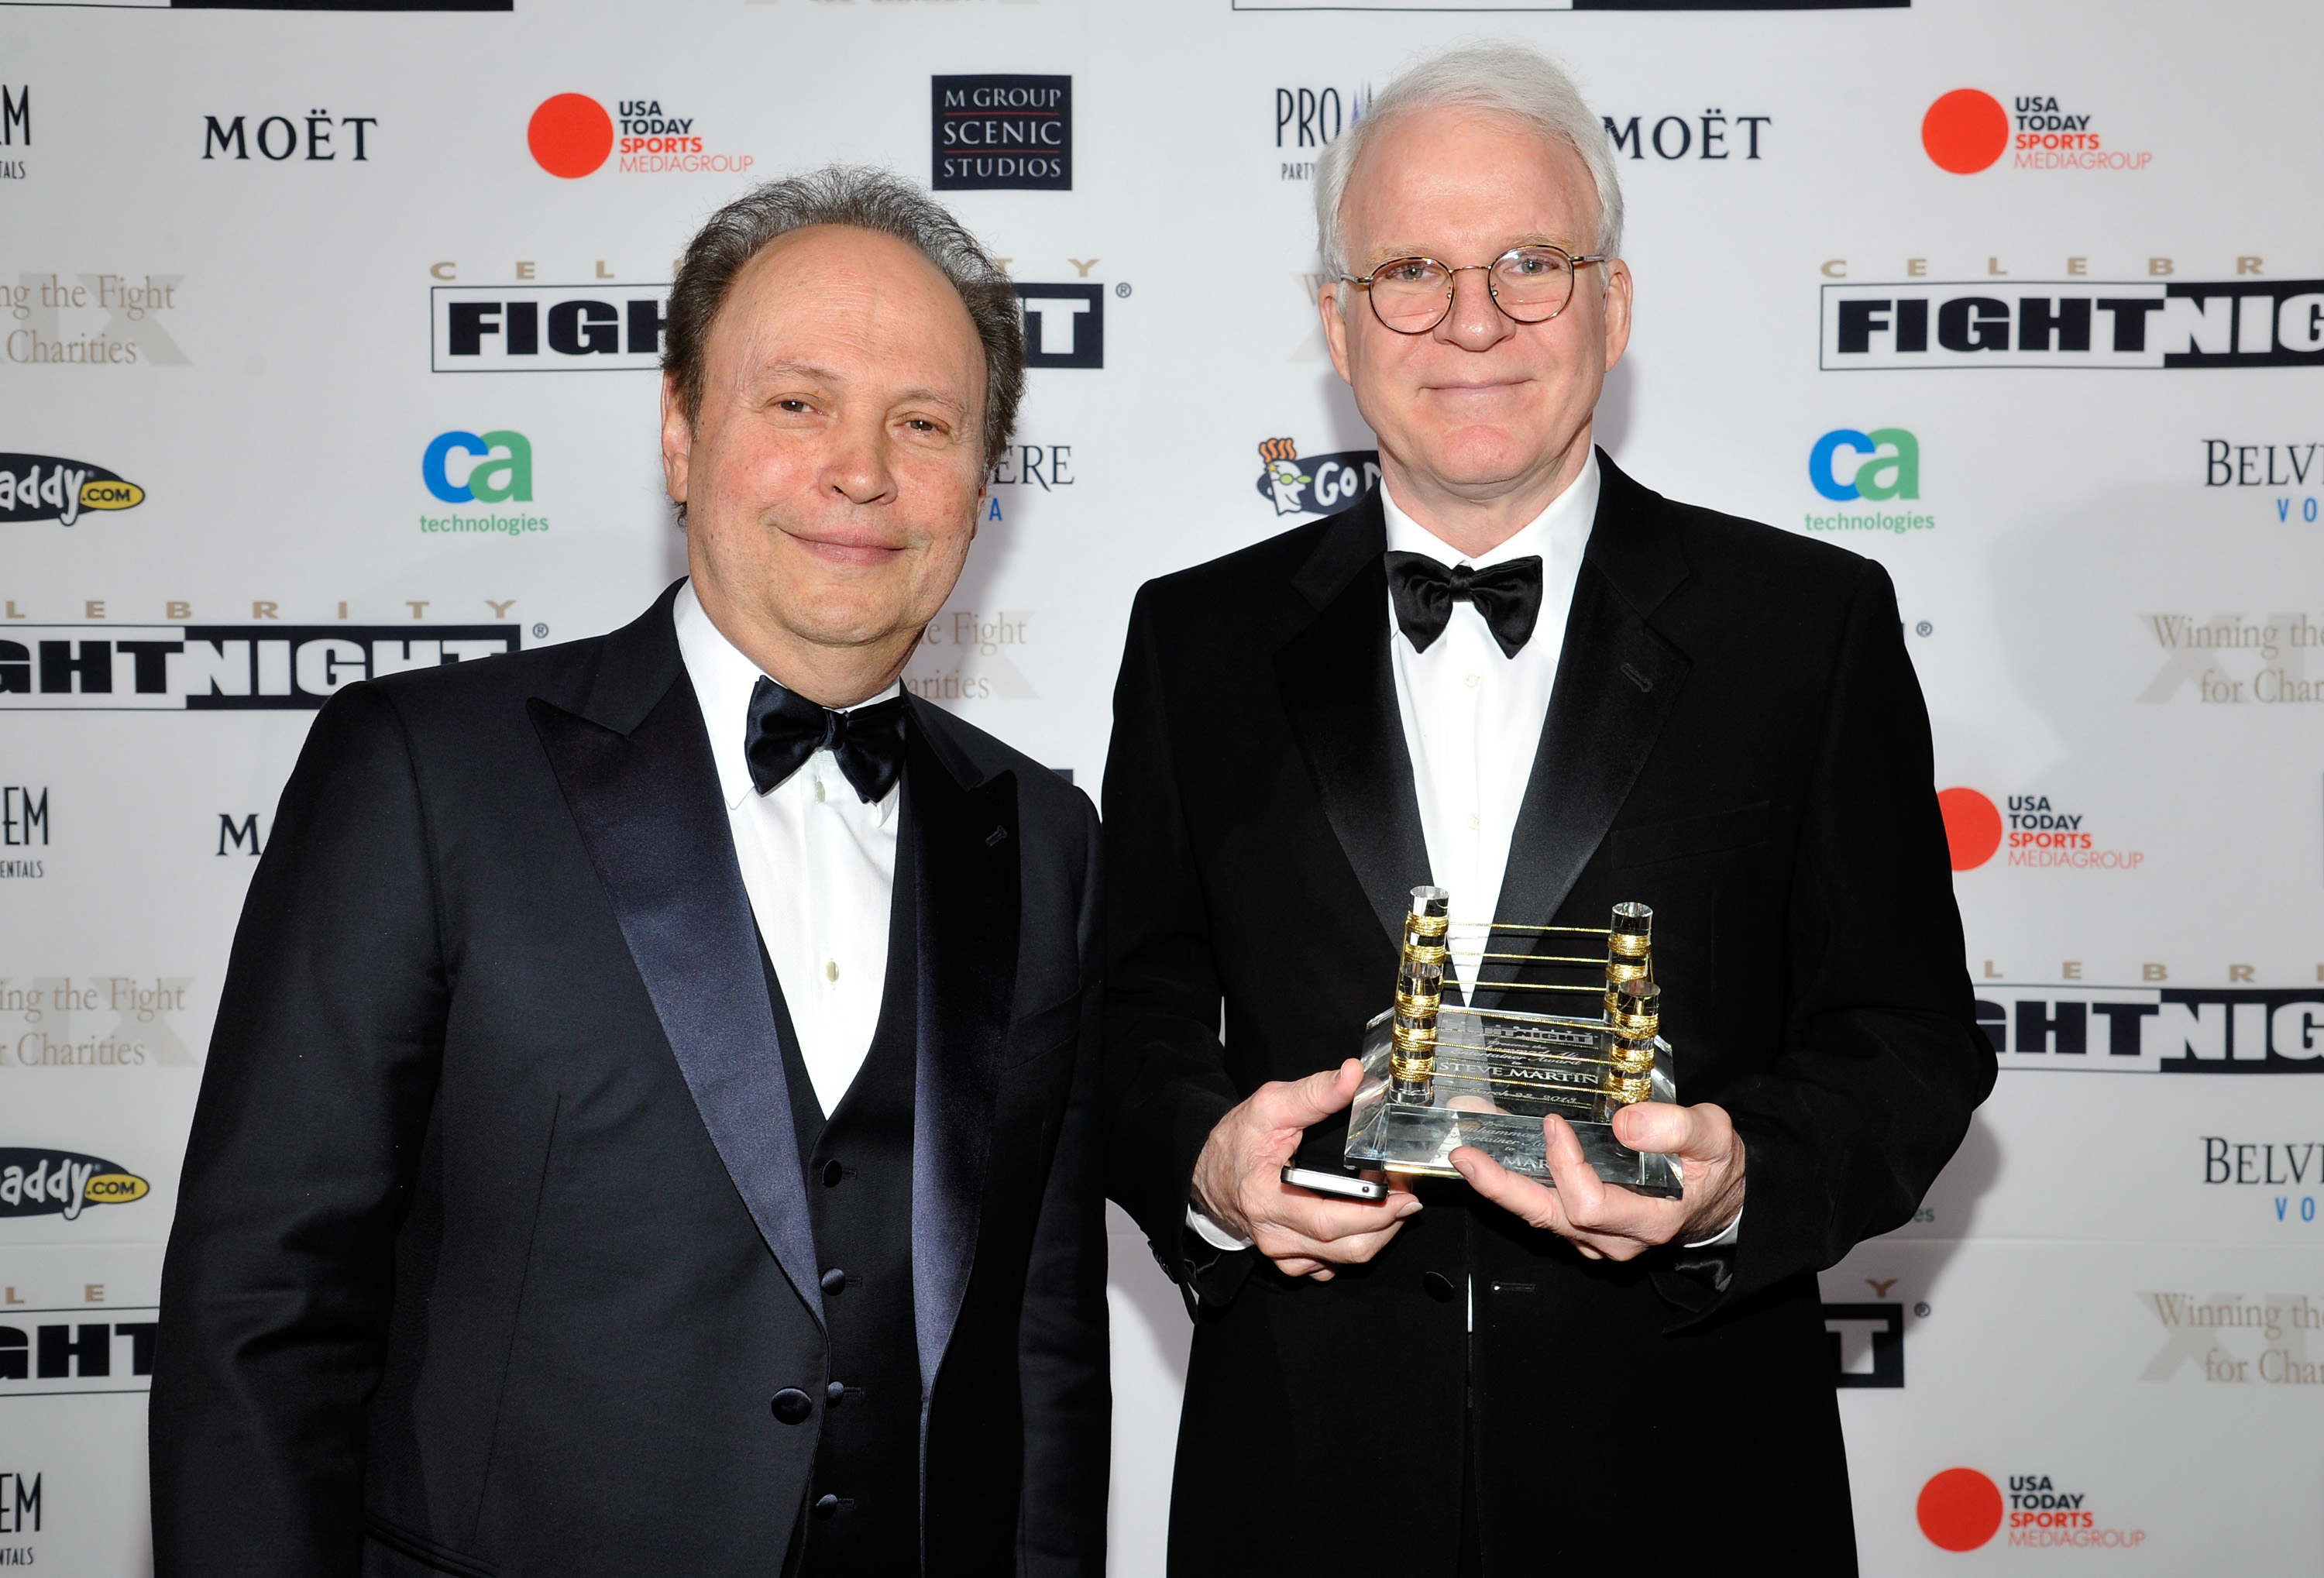 PHOENIX, AZ - MARCH 23:  Actor Billy Crystal and Actor Steve Martin attend Muhammad Ali's Celebrity Fight Night XIX at JW Marriott Desert Ridge Resort & Spa on March 23, 2013 in Phoenix, Arizona.  (Photo by John Sciulli/Getty Images for Fight Night)